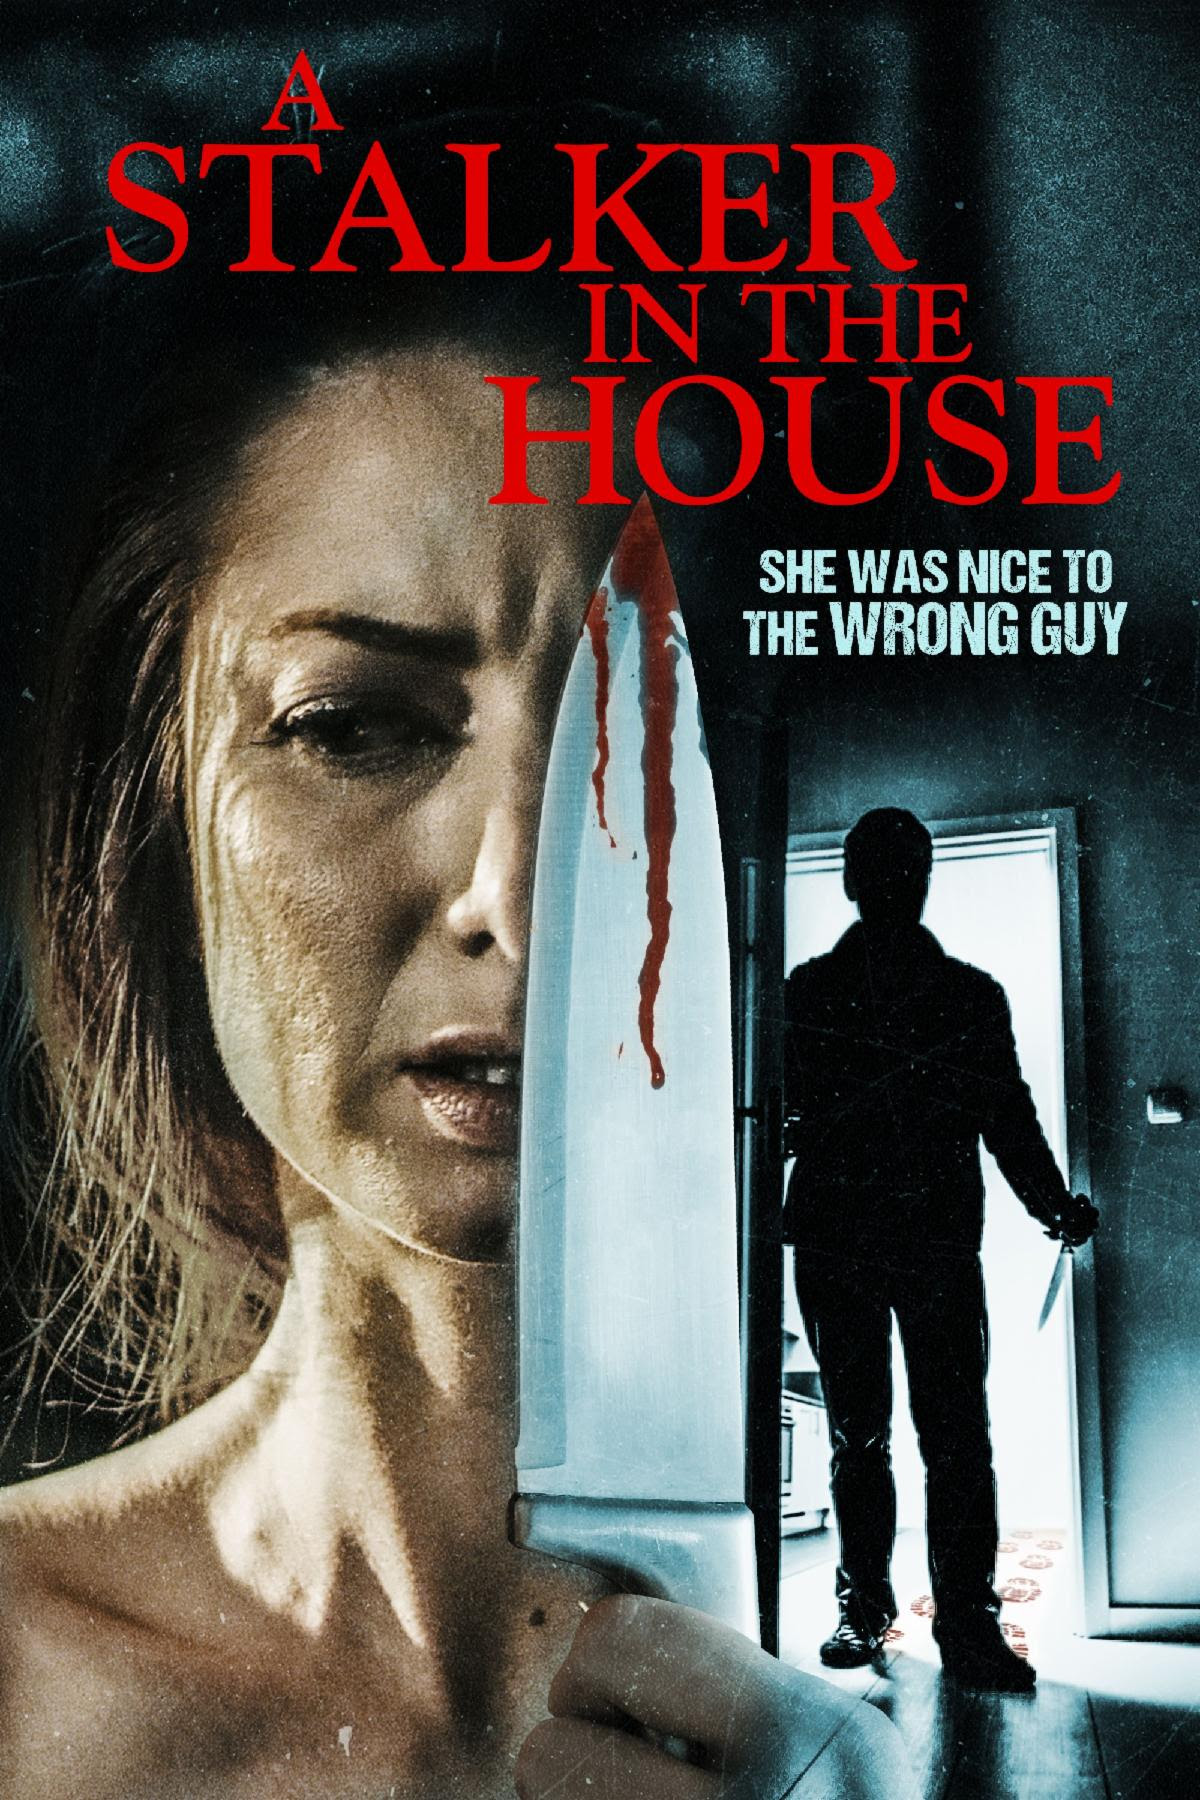 A Stalker in the House movie review